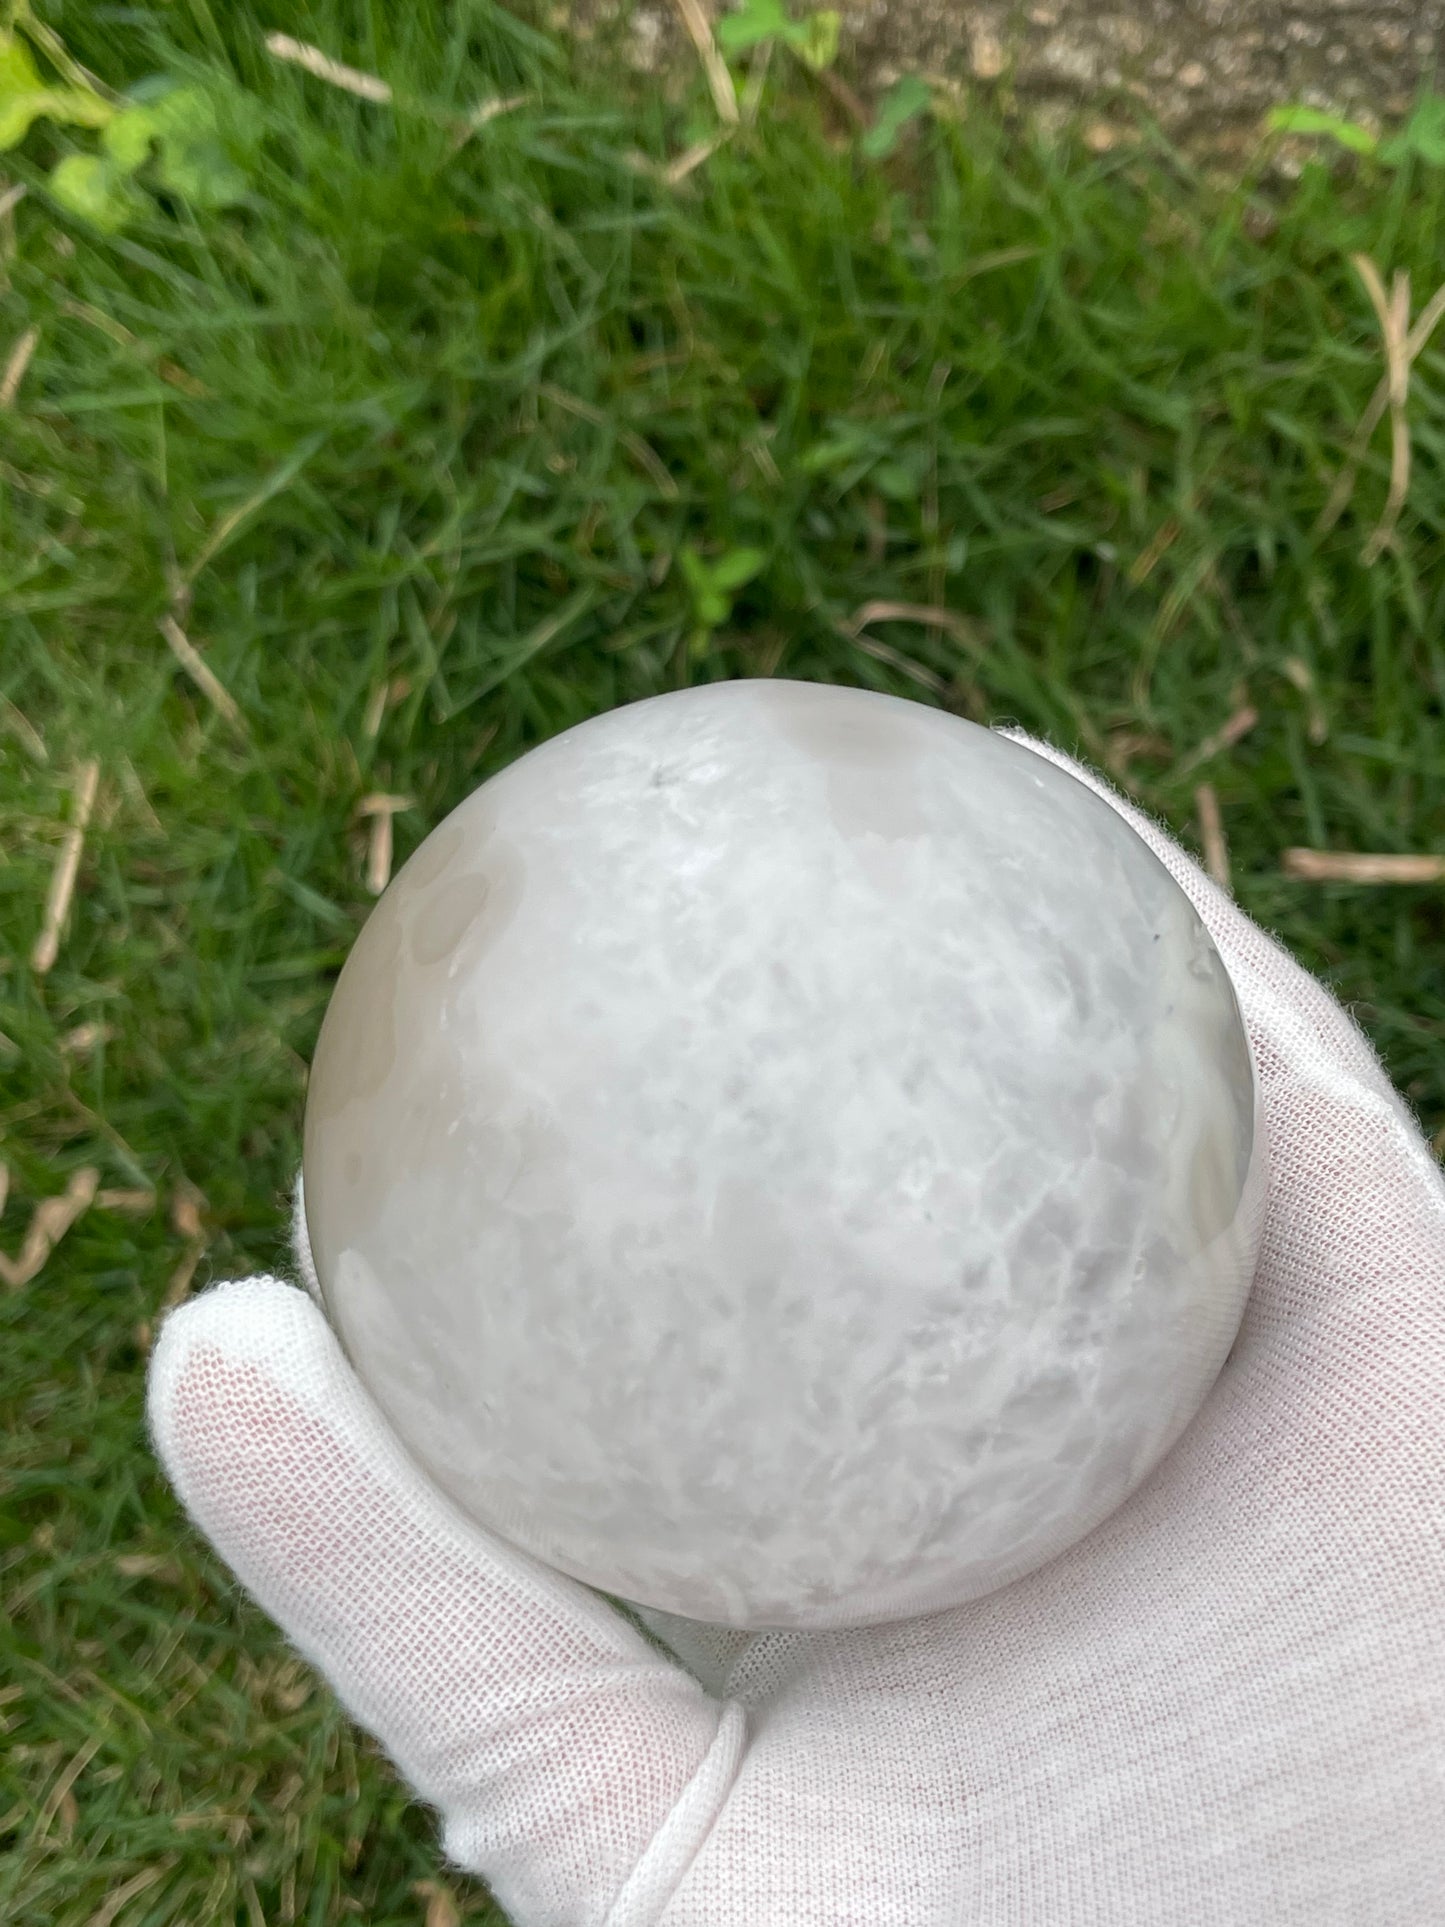 1.2LB Natural Geode Sphere,Agate Geode Ball,Natural Druse Ball,Crystal Ball Hole,Mineral Specimens,Crystal Heal,Crystal Gift,Home Decoration